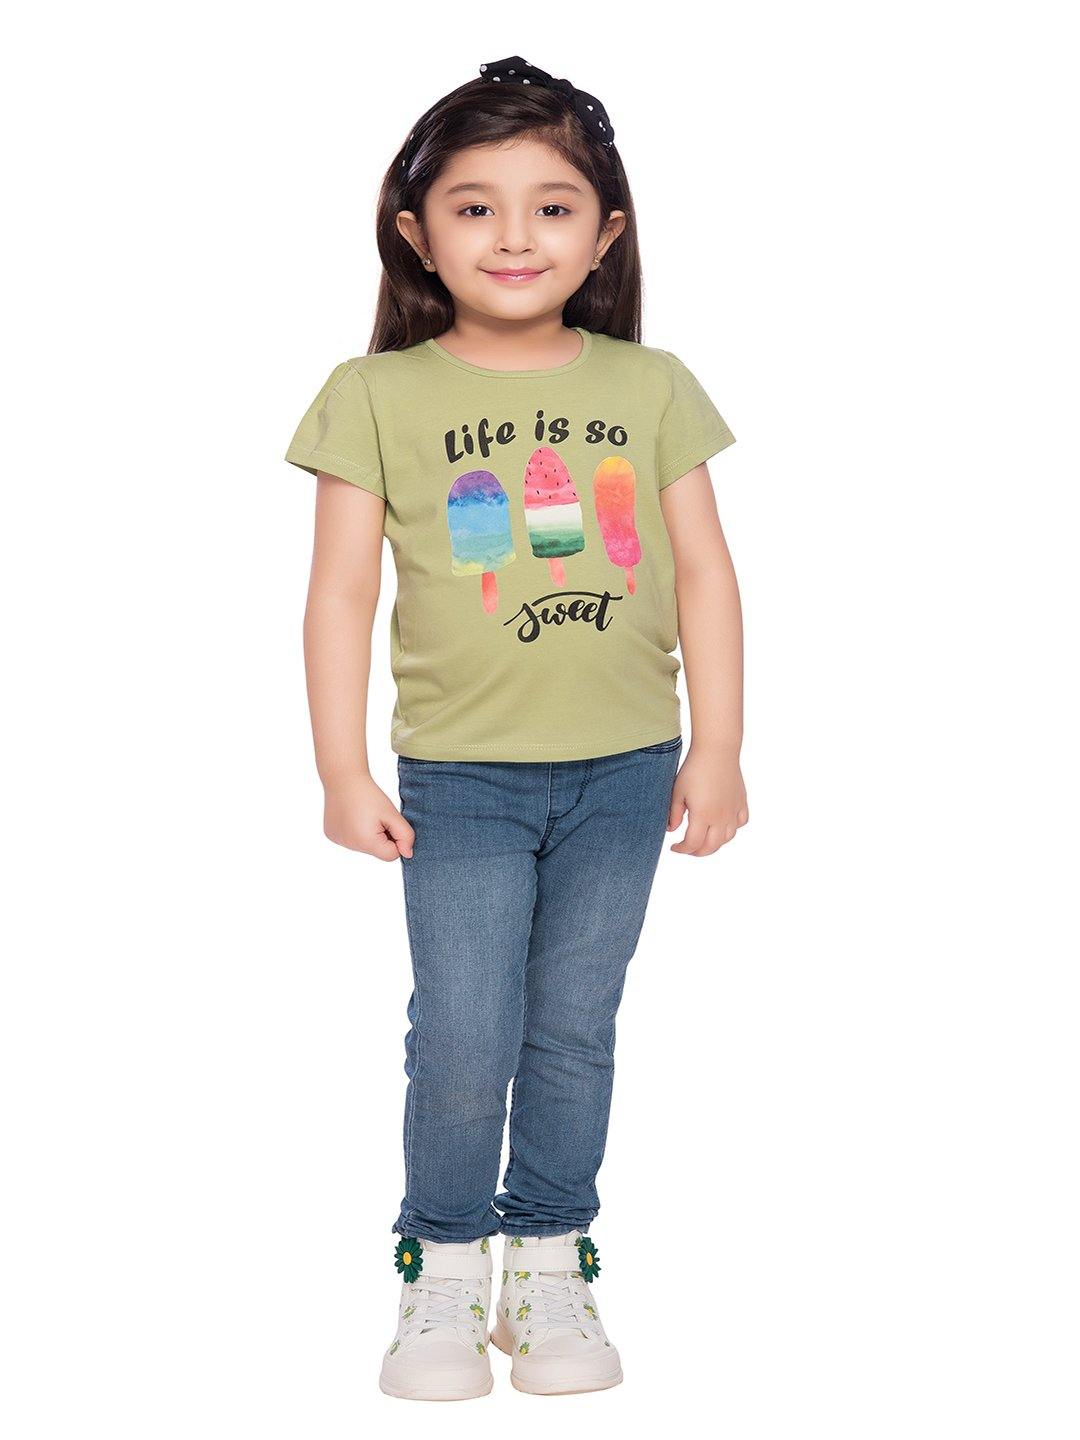 Tiny Baby Green Colored Top - T-108Green - TINY BABY INDIA shop.tinybaby.in